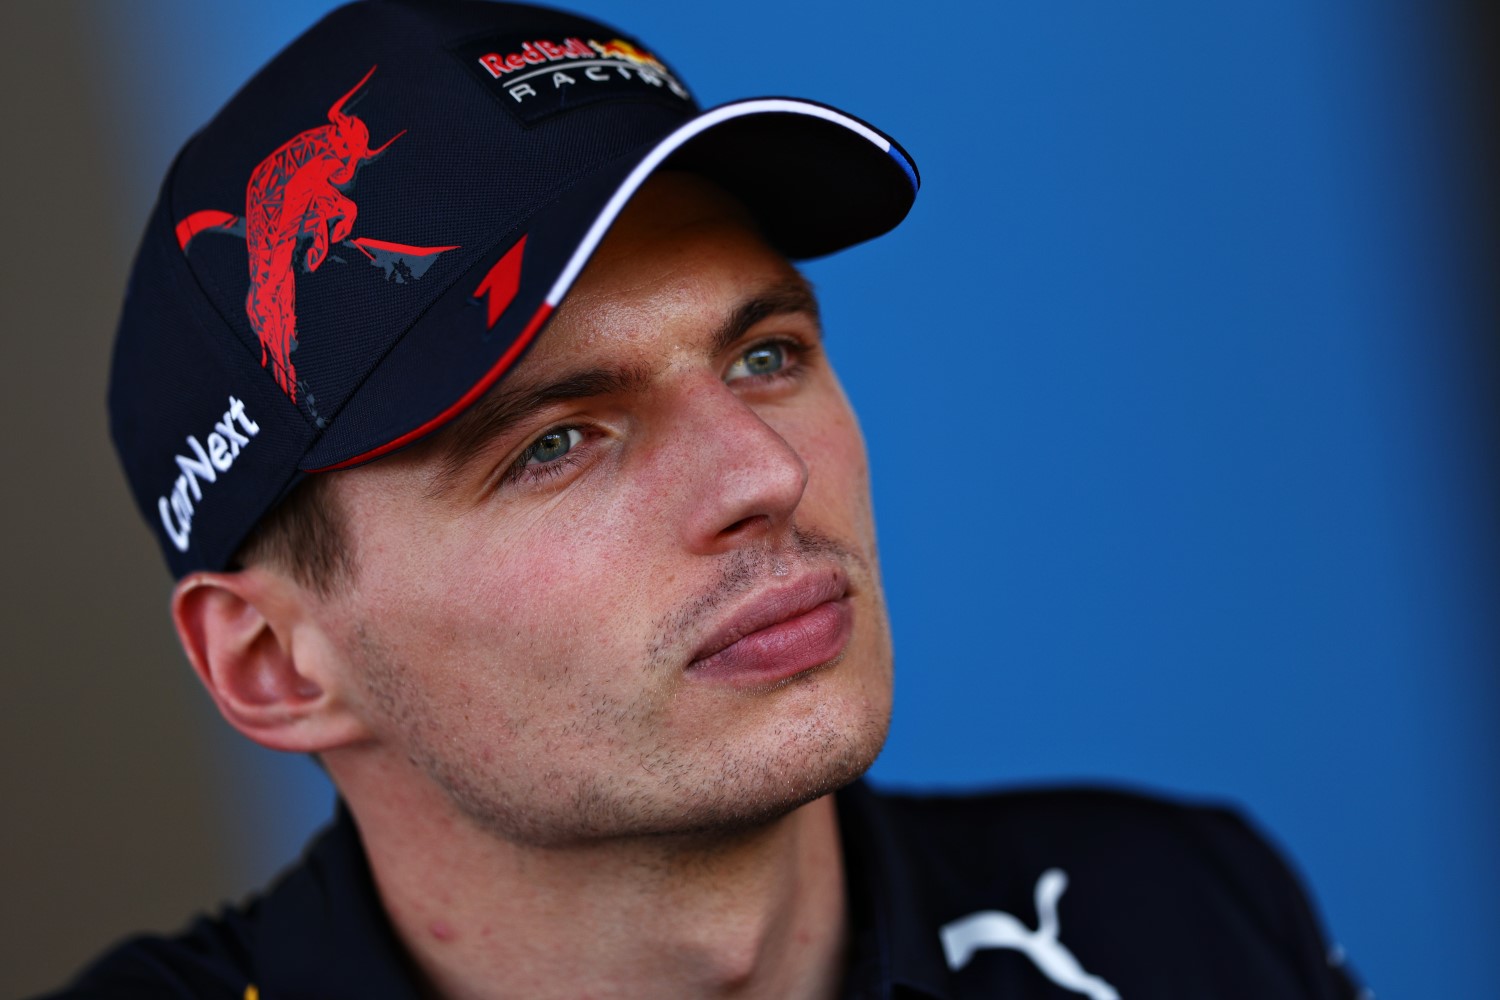 Max Verstappen of the Netherlands and Oracle Red Bull Racing talks to the media in the Paddock during previews ahead of the F1 Grand Prix of France at Circuit Paul Ricard on July 21, 2022 in Le Castellet, France. (Photo by Clive Rose/Getty Images)